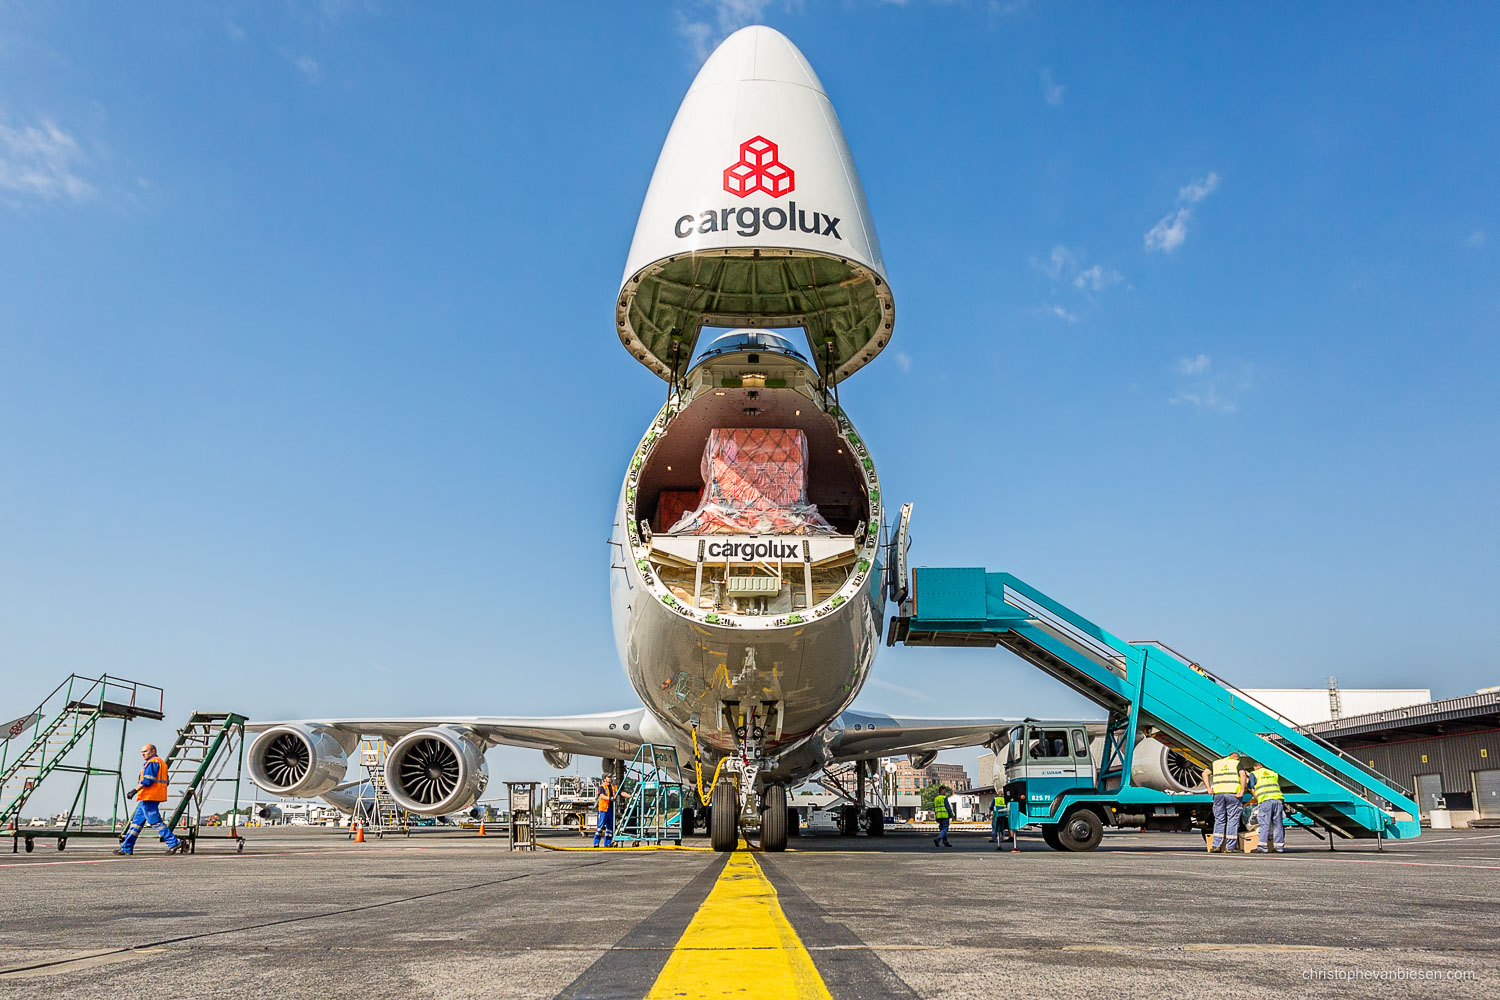 Work with me - Commission Work - Boeing 747 of Luxembourg's Cargolux fleet - Say Aaaah - Photography by Christophe Van Biesen - Luxembourg Landscape and Travel Photographer